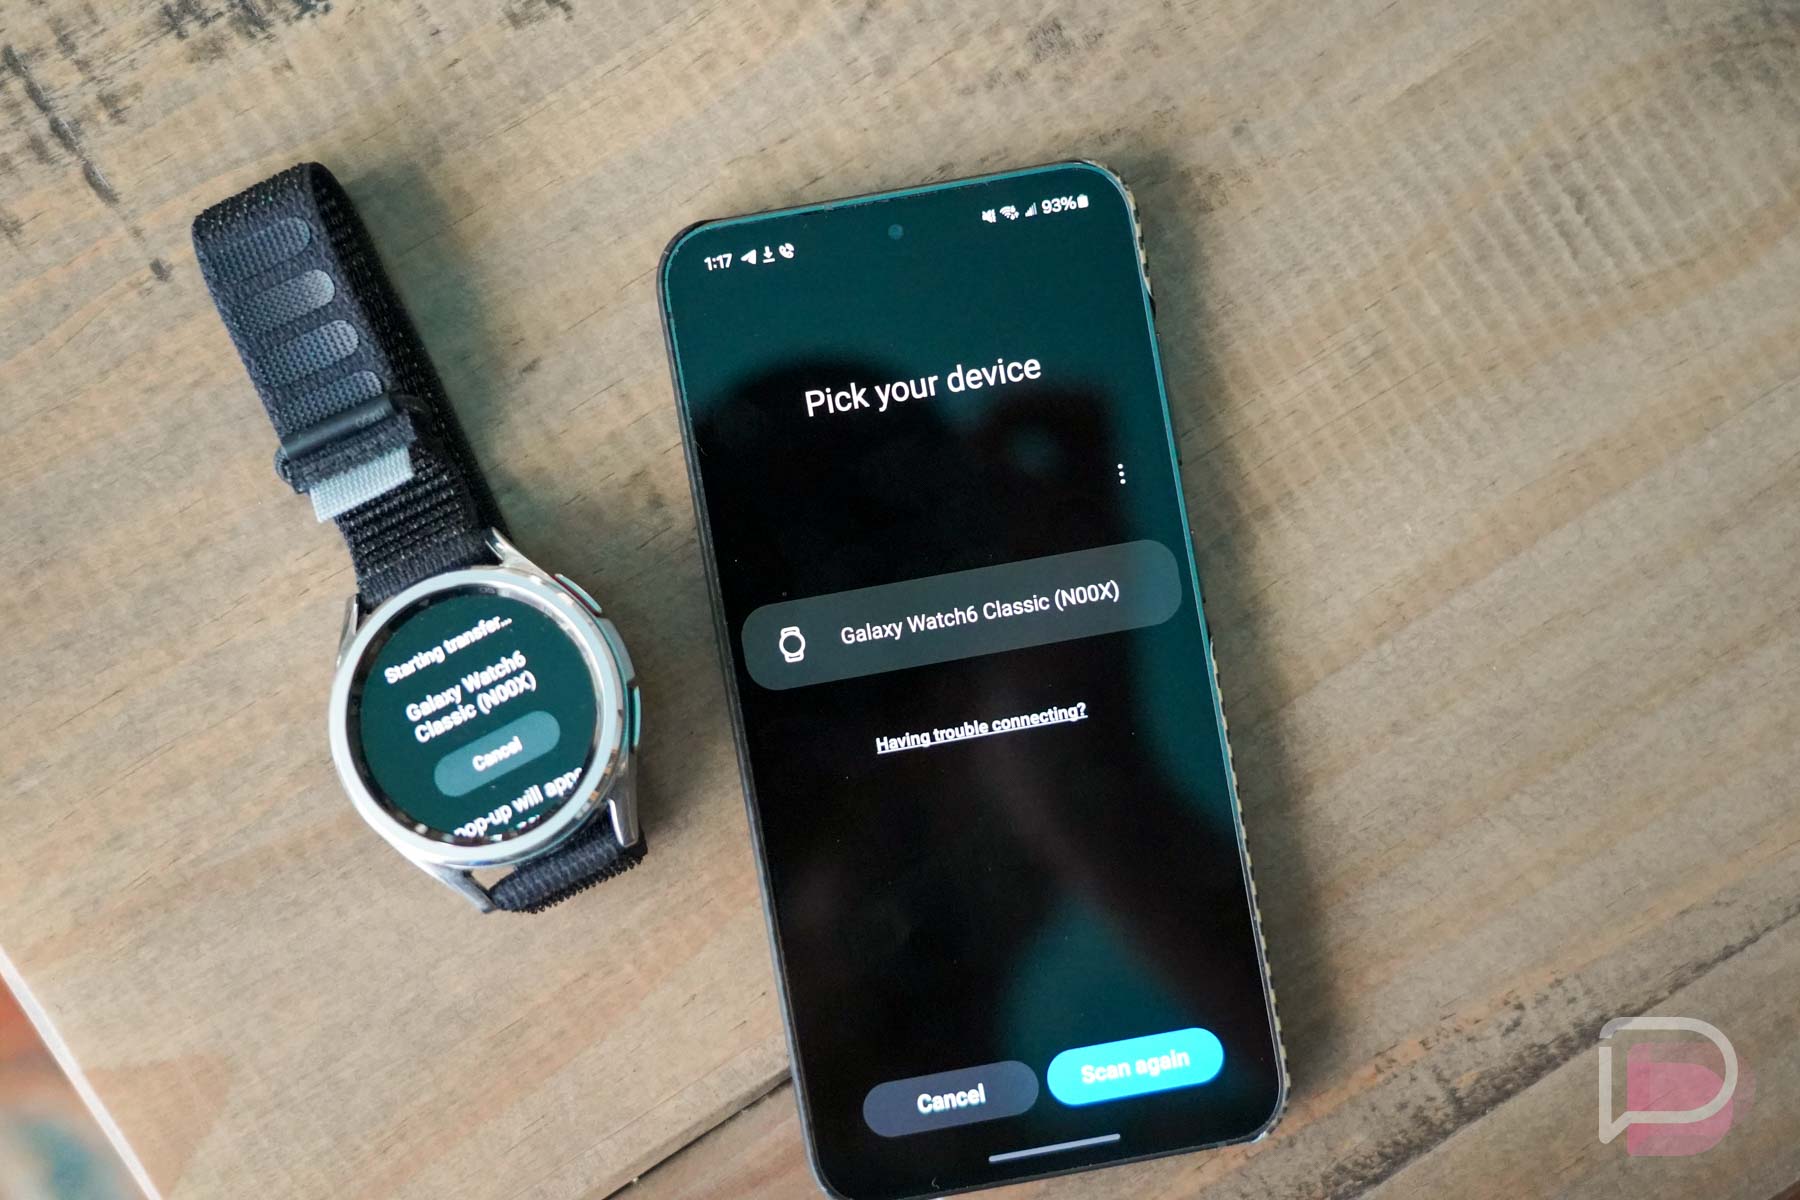 Starting transfer of Galaxy Watch to new phone